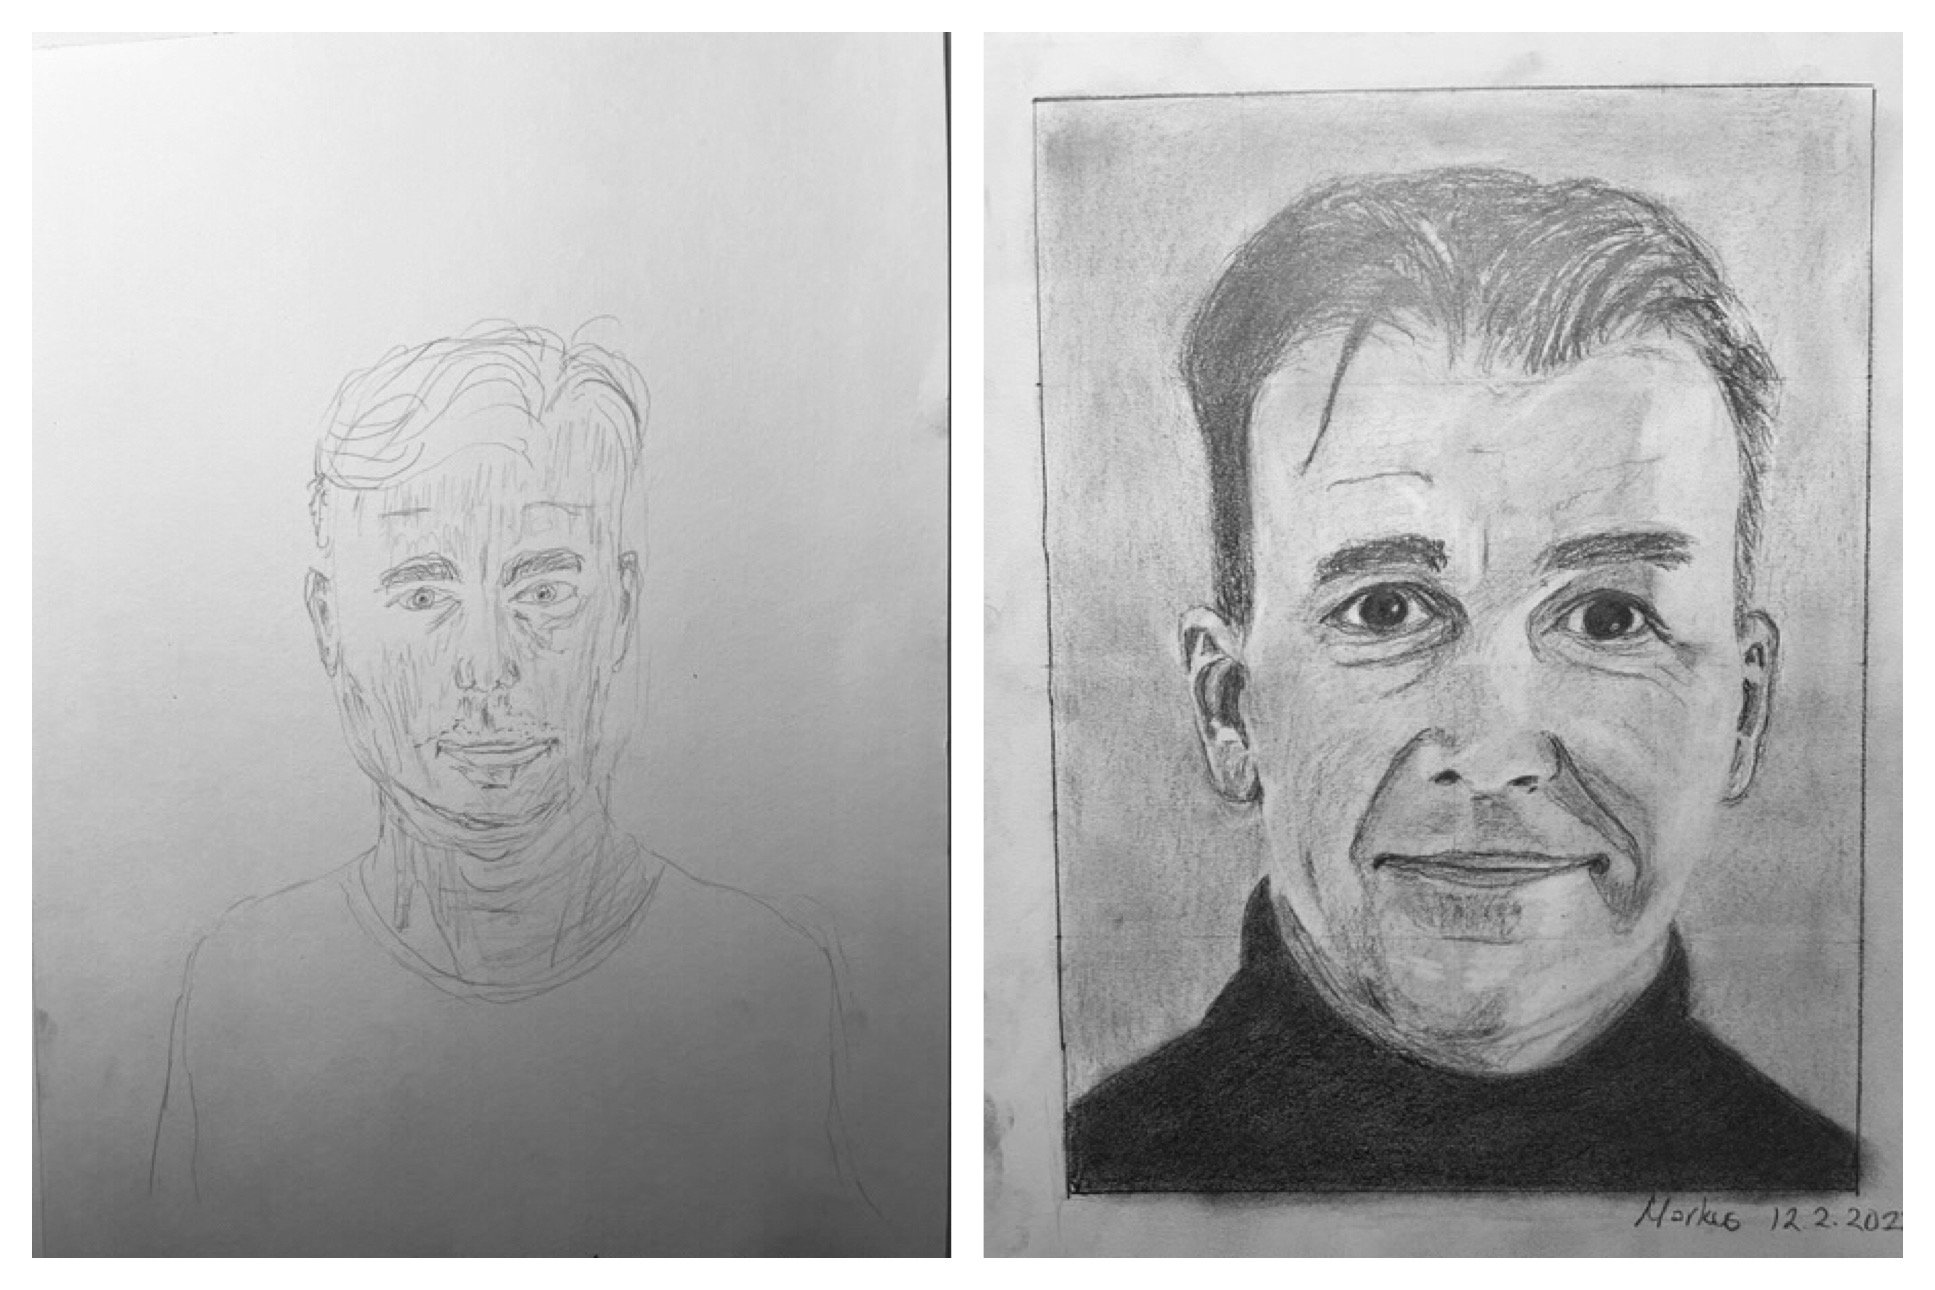 Markus' Before and After Self-Portraits February 7-12, 2022